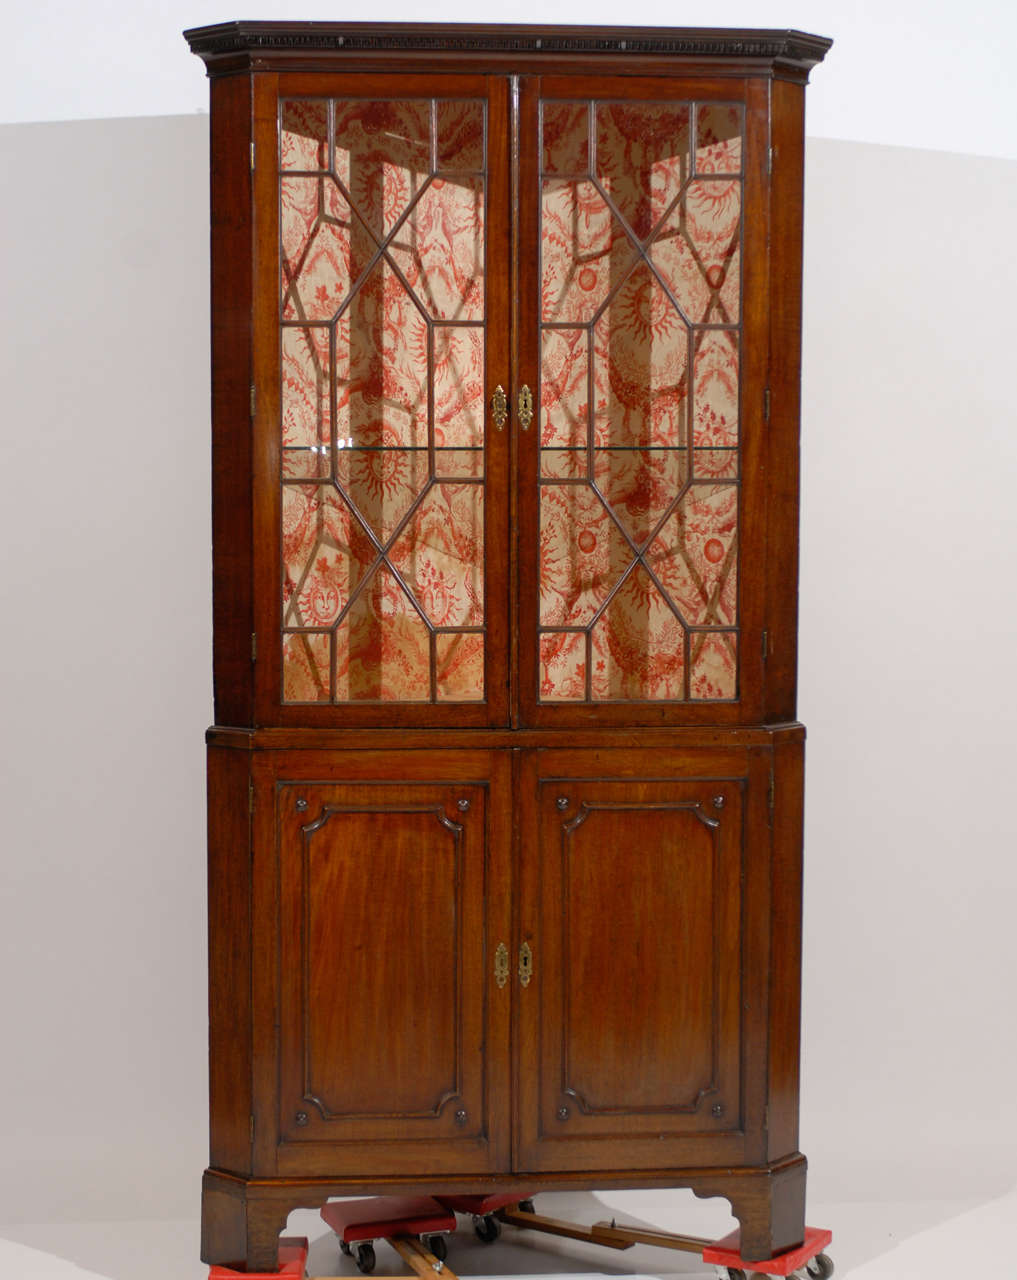 A George III carved mahogany corner cabinet with dentil molded canted cornice above a pair of 13-pane doors, on lower part having cabinet doors with applied molding with interior shelving. All resting on bracket feet. 

William Word Fine Antiques: